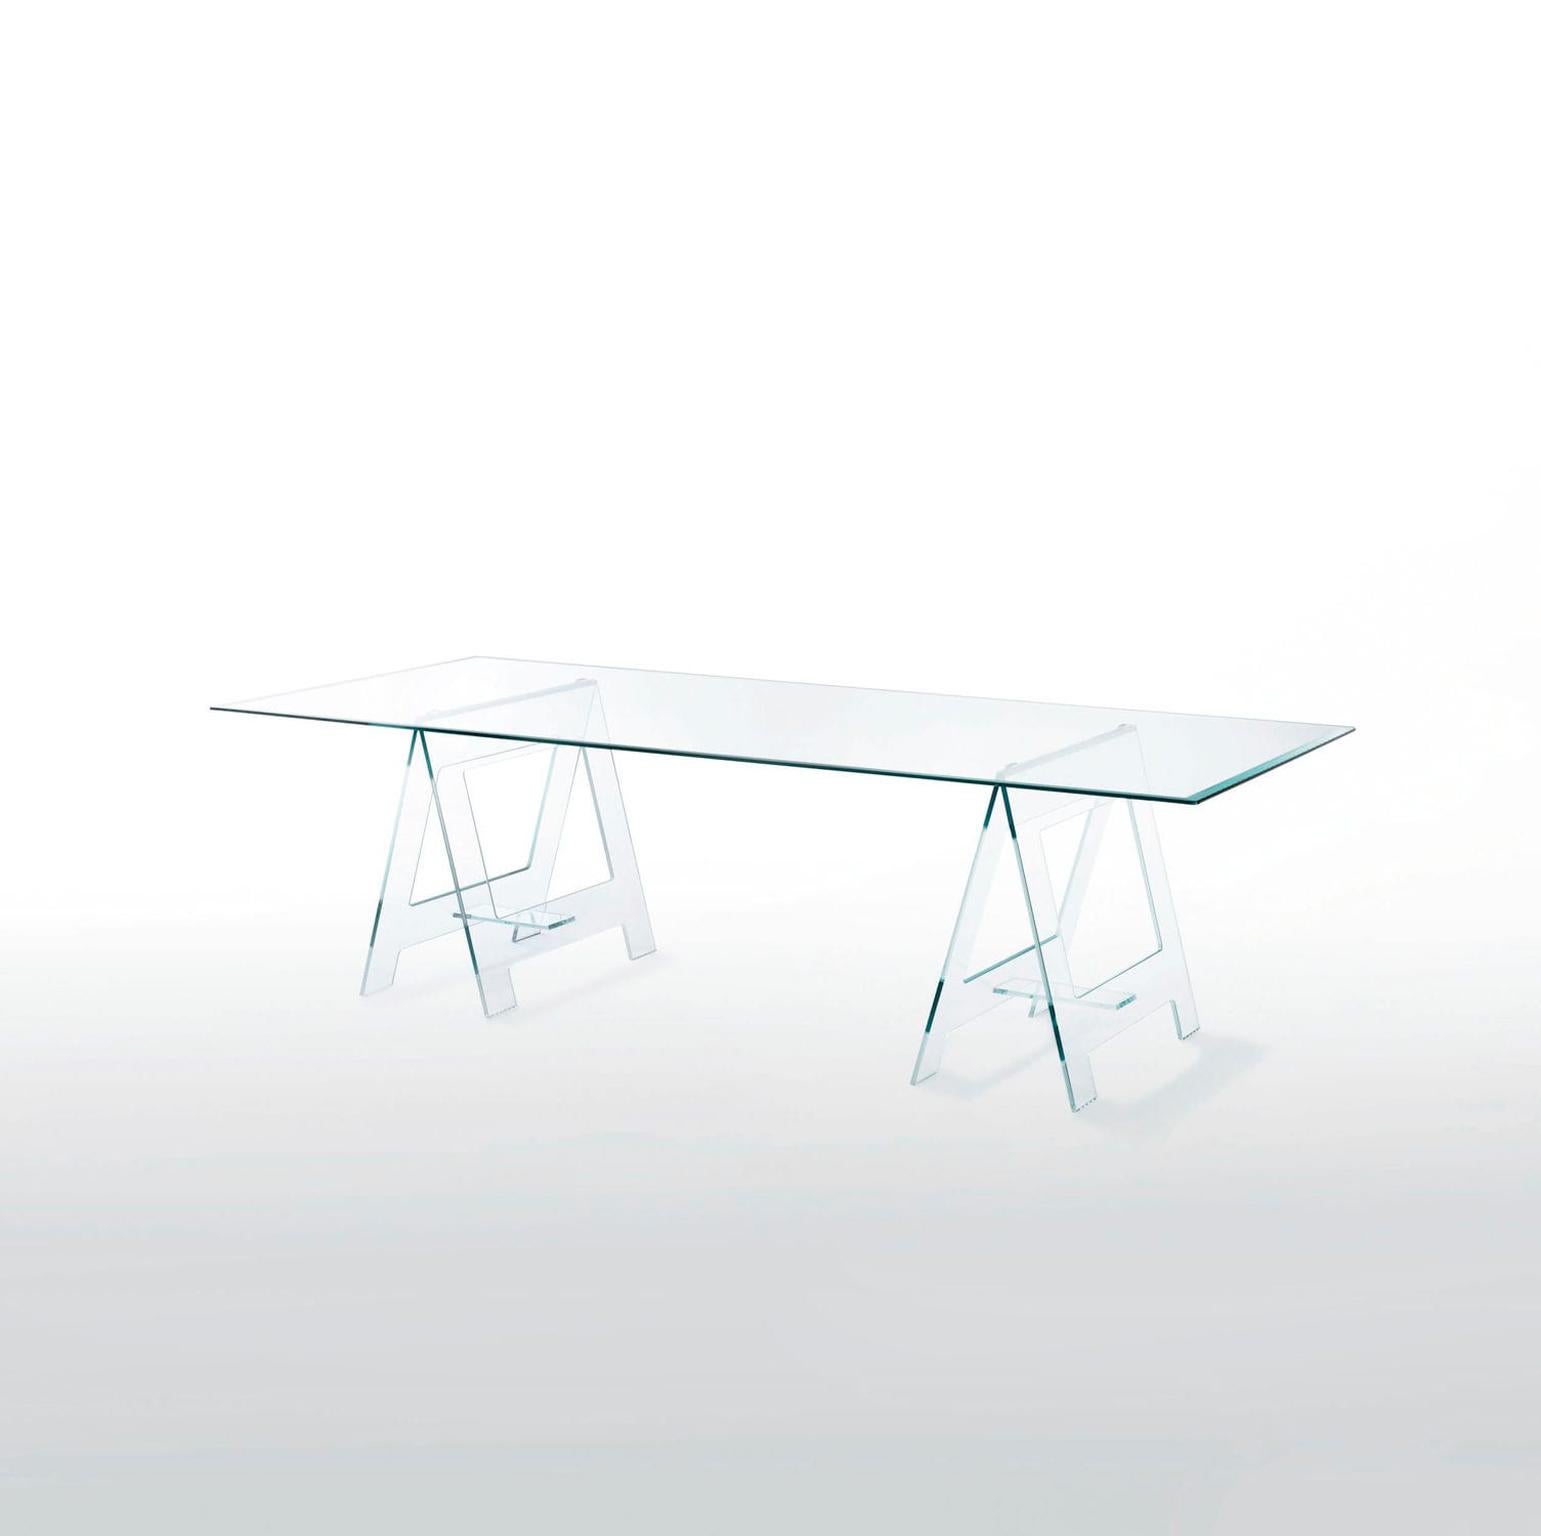 This is a very eclectic table cause it's unusual form with its top on a pair of easels made in clear crystal, it's an important table or desk but at the same time it’s a very light presence in a room.

The Italian design gives a touch of modernism